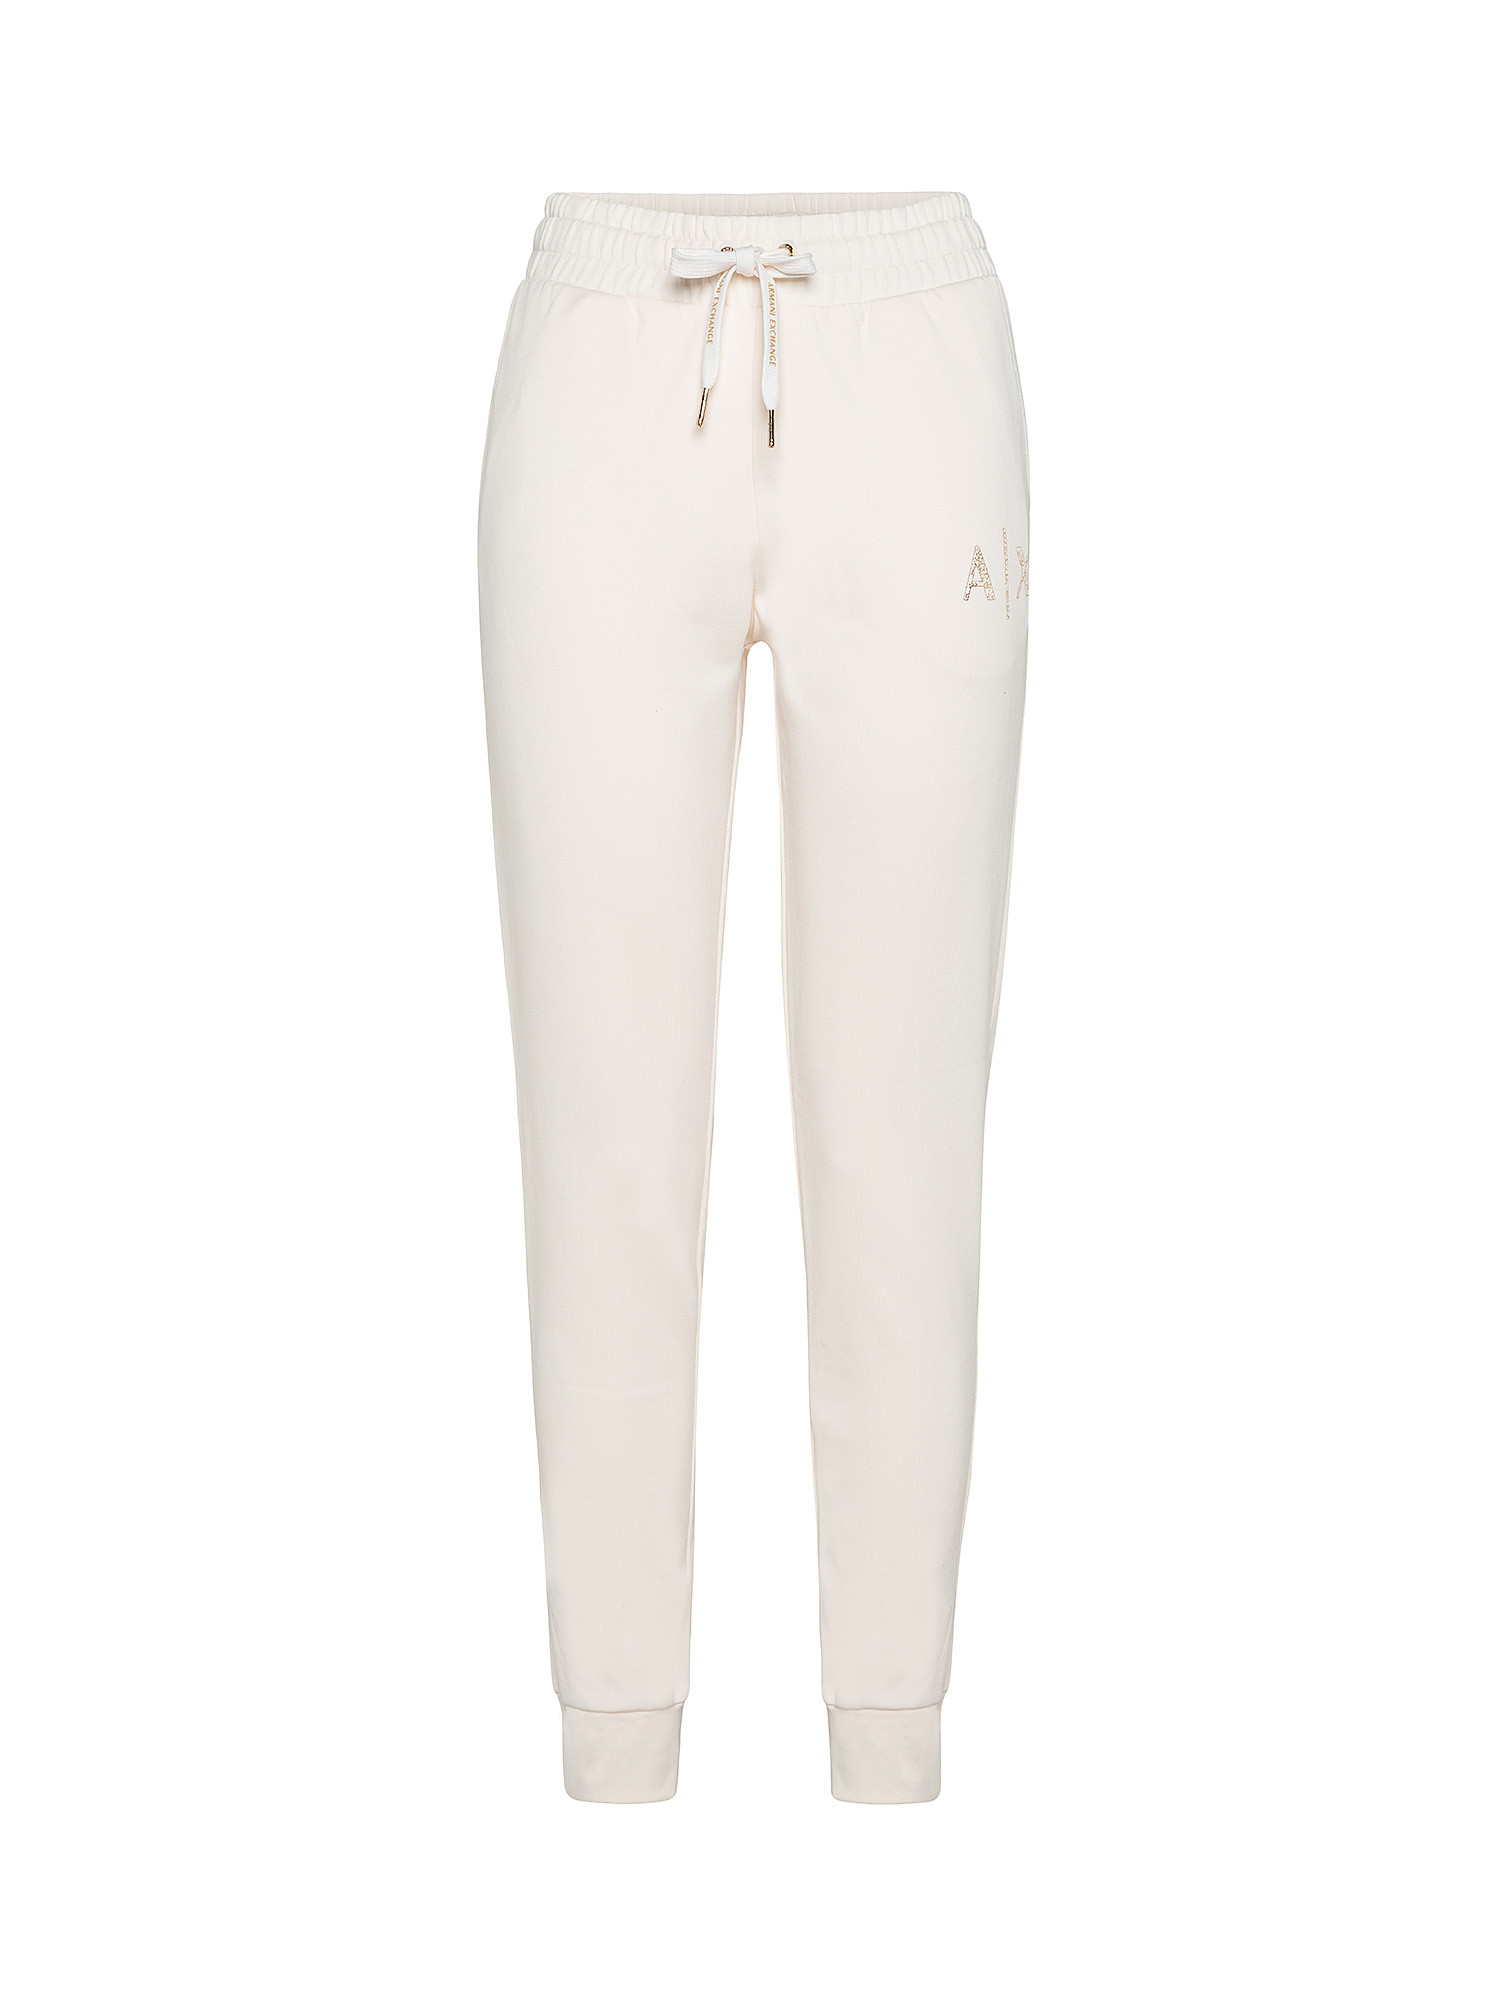 Jogger trousers with logo, Cream, large image number 0